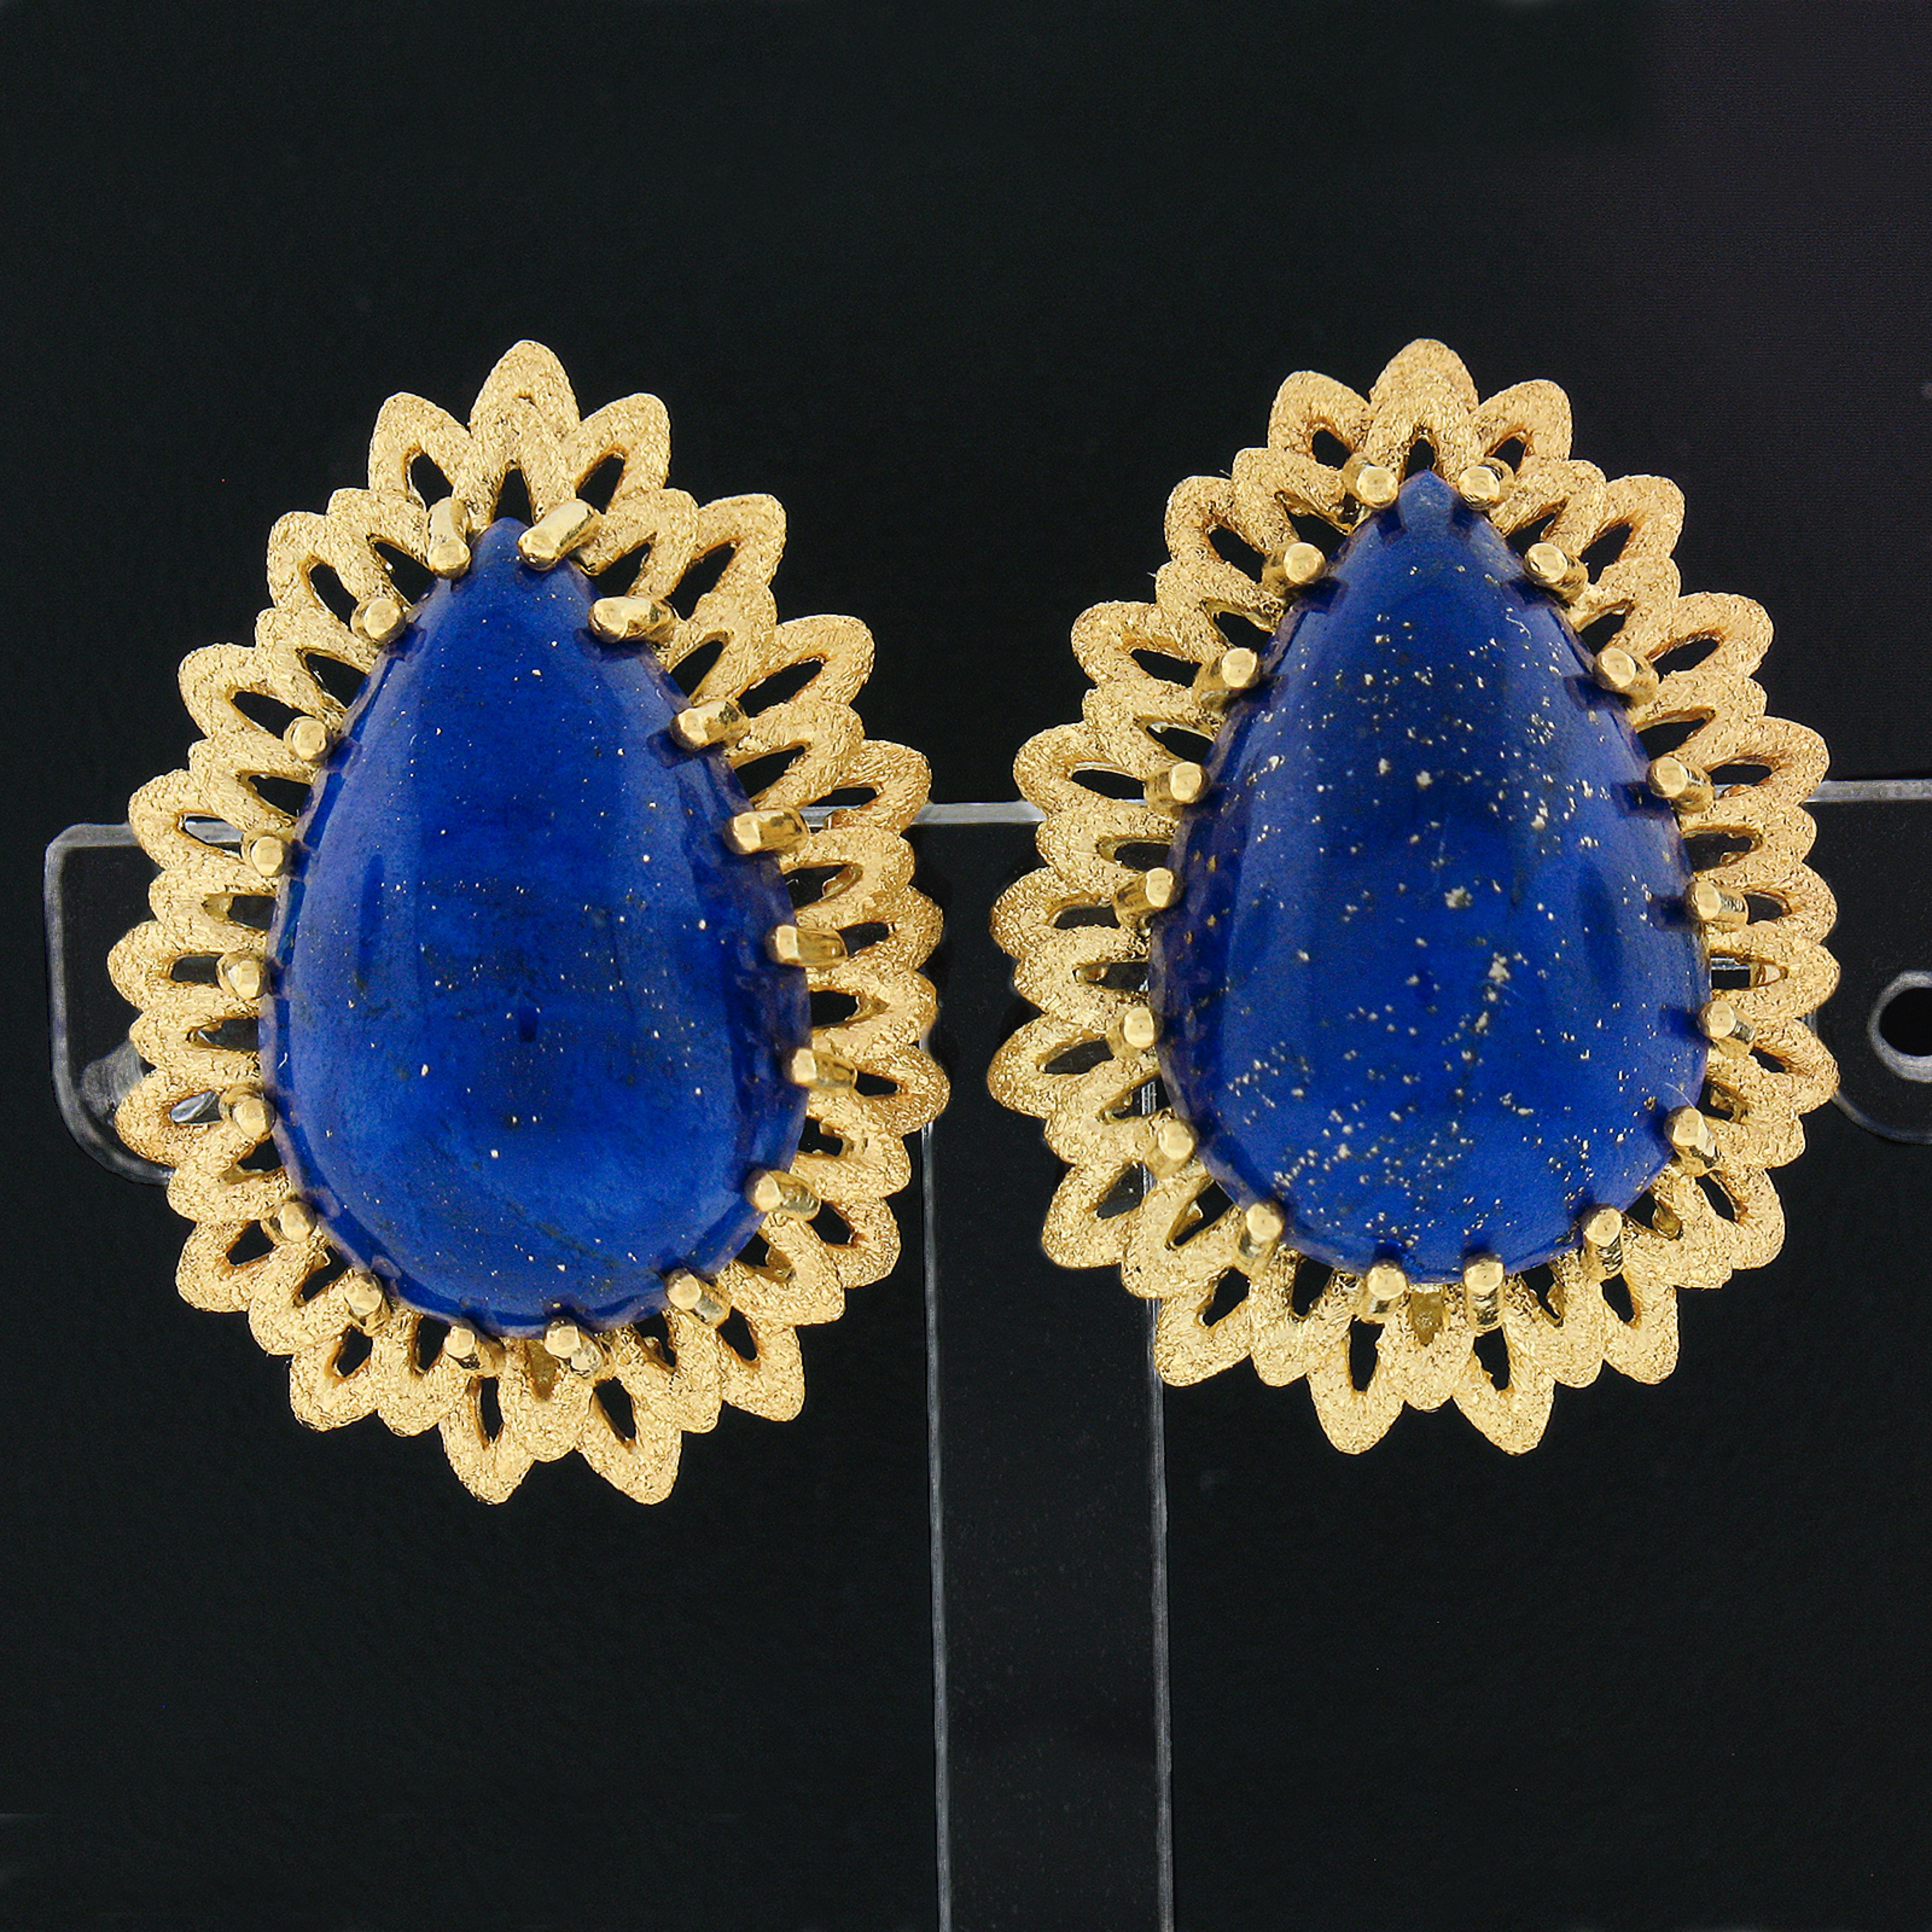 These beautiful vintage earrings are crafted in solid 18k yellow gold and feature a pair of absolutely gorgeous lapis stones. These large lapis are pear cabochon cut and are multi-prong set at the center of an elegantly layered and flared open work